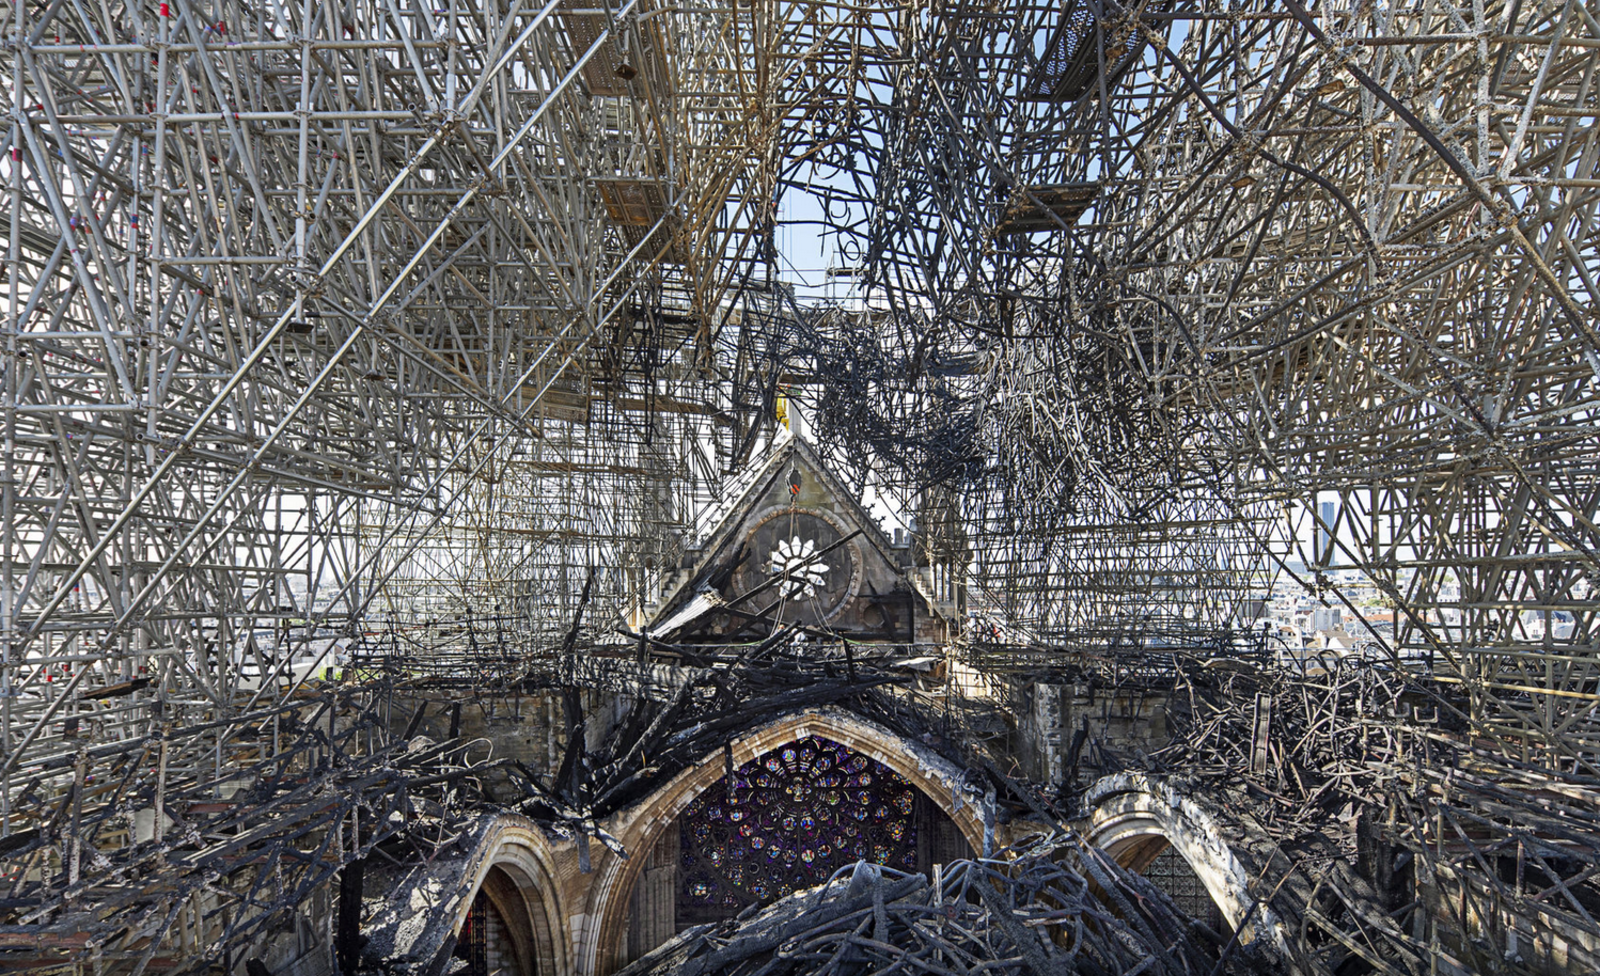 Illustration for article titled Notre Dame Cathedral - How they put out the fire